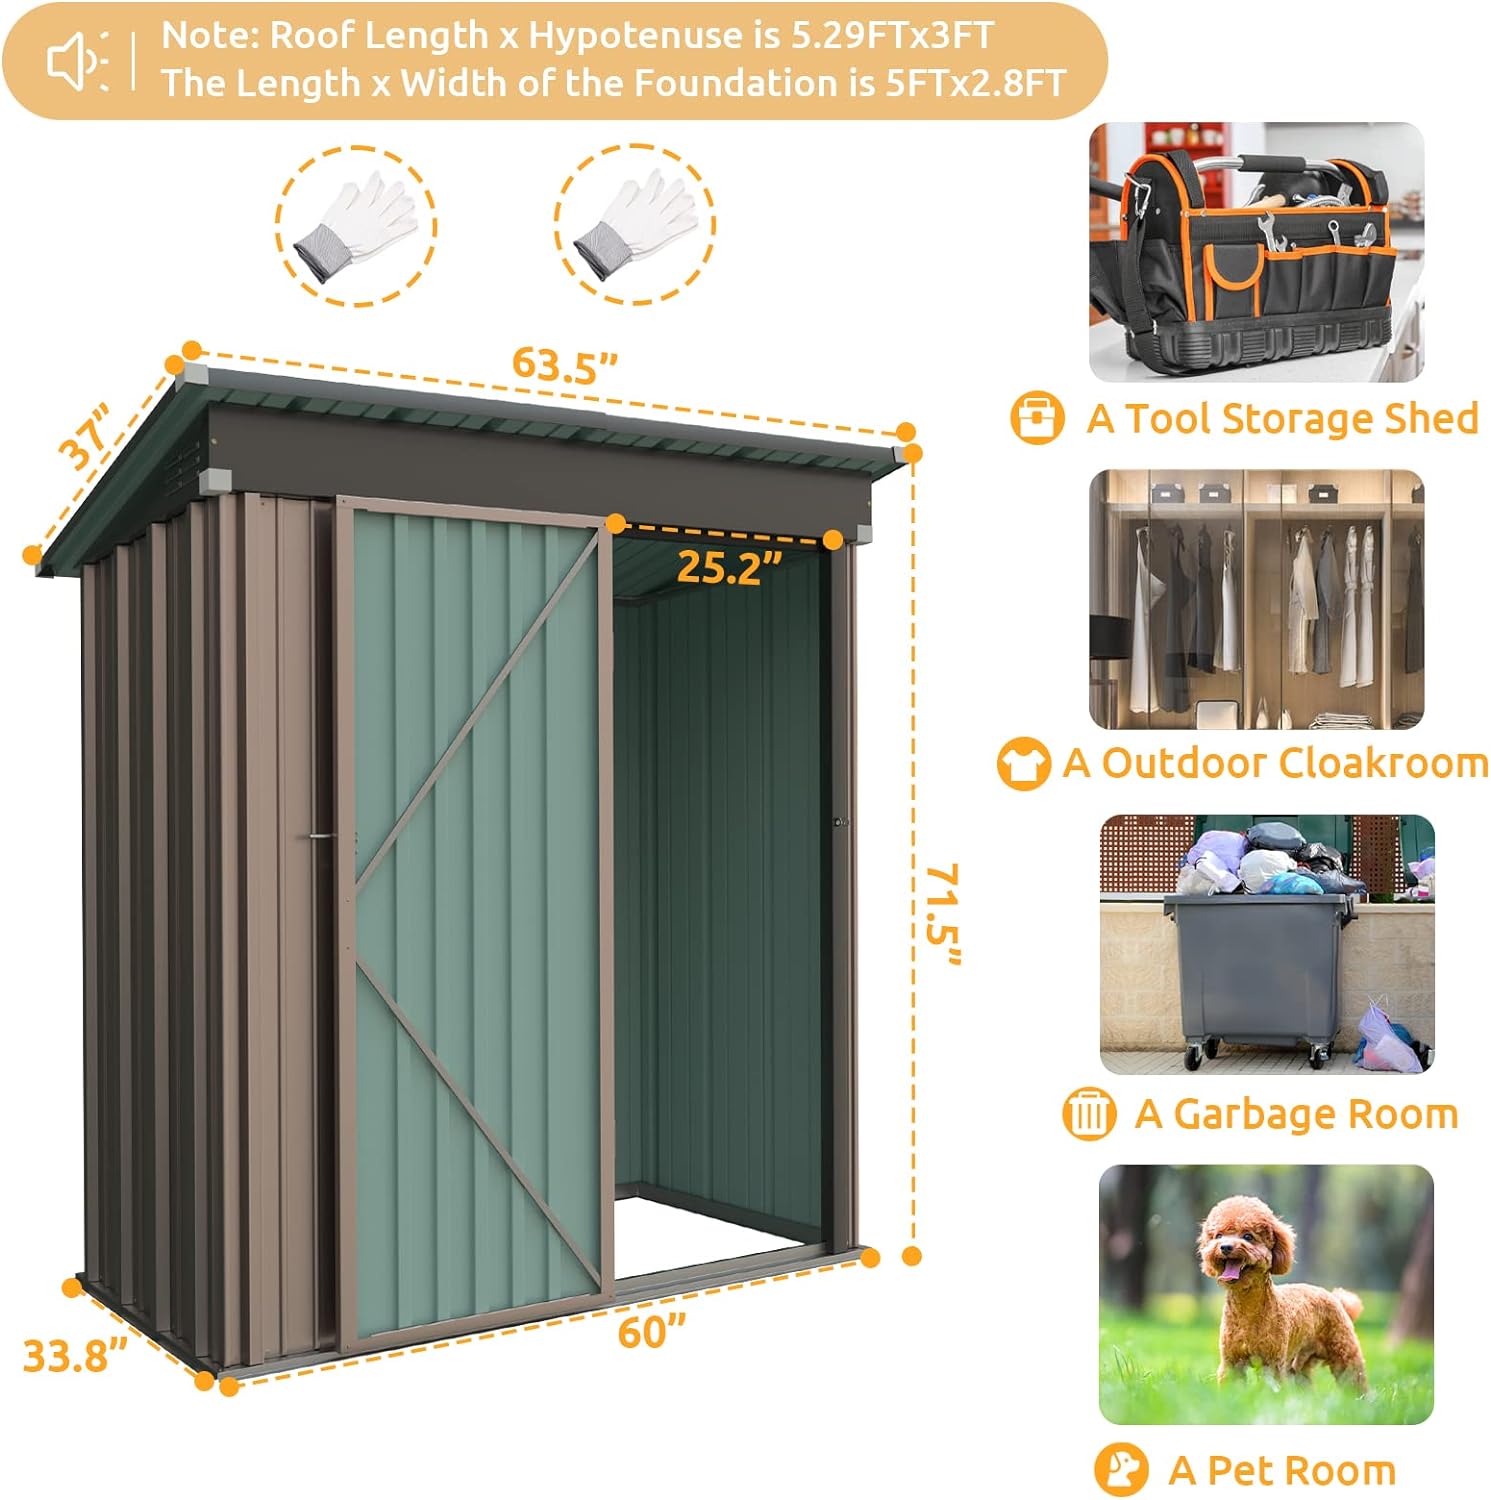 udpatio metal outdoor storage shed 8ft x 6ft review